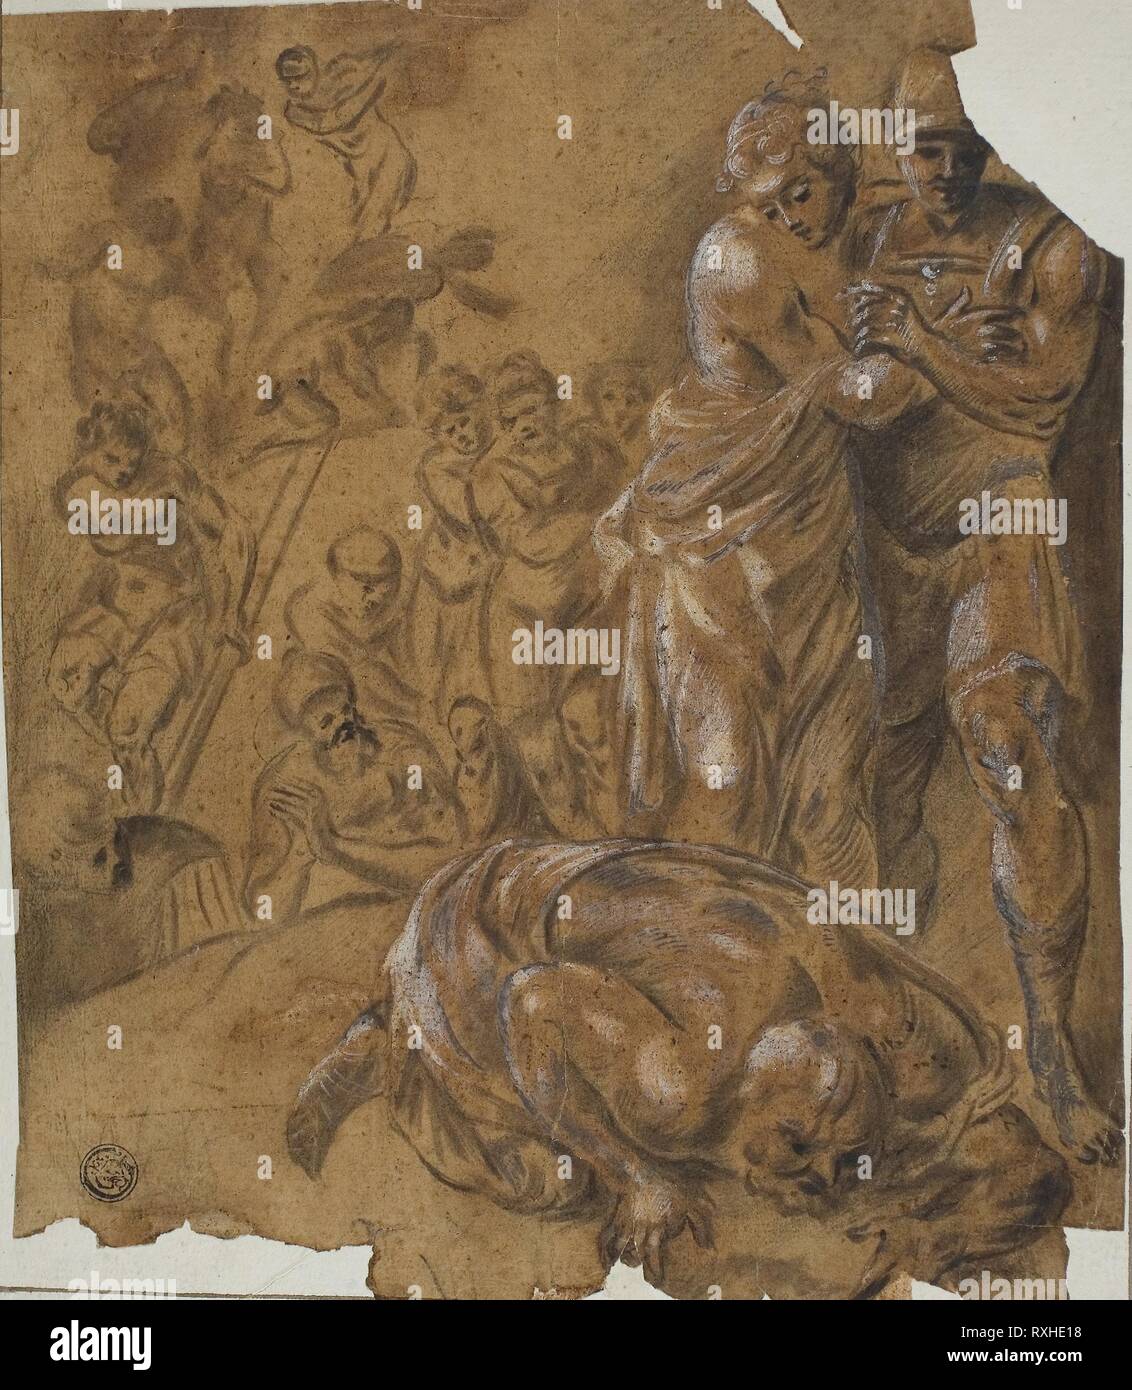 Return of Agamemnon. After Francesco Primaticcio; Italian, 1504-1570. Date: 1779-1799. Dimensions: 229 x 198 mm (max.). Black chalk with brush and brown wash, heightened with lead white (partly oxidized), on tan laid paper, laid down on ivory laid paper. Origin: Italy. Museum: The Chicago Art Institute. Stock Photo